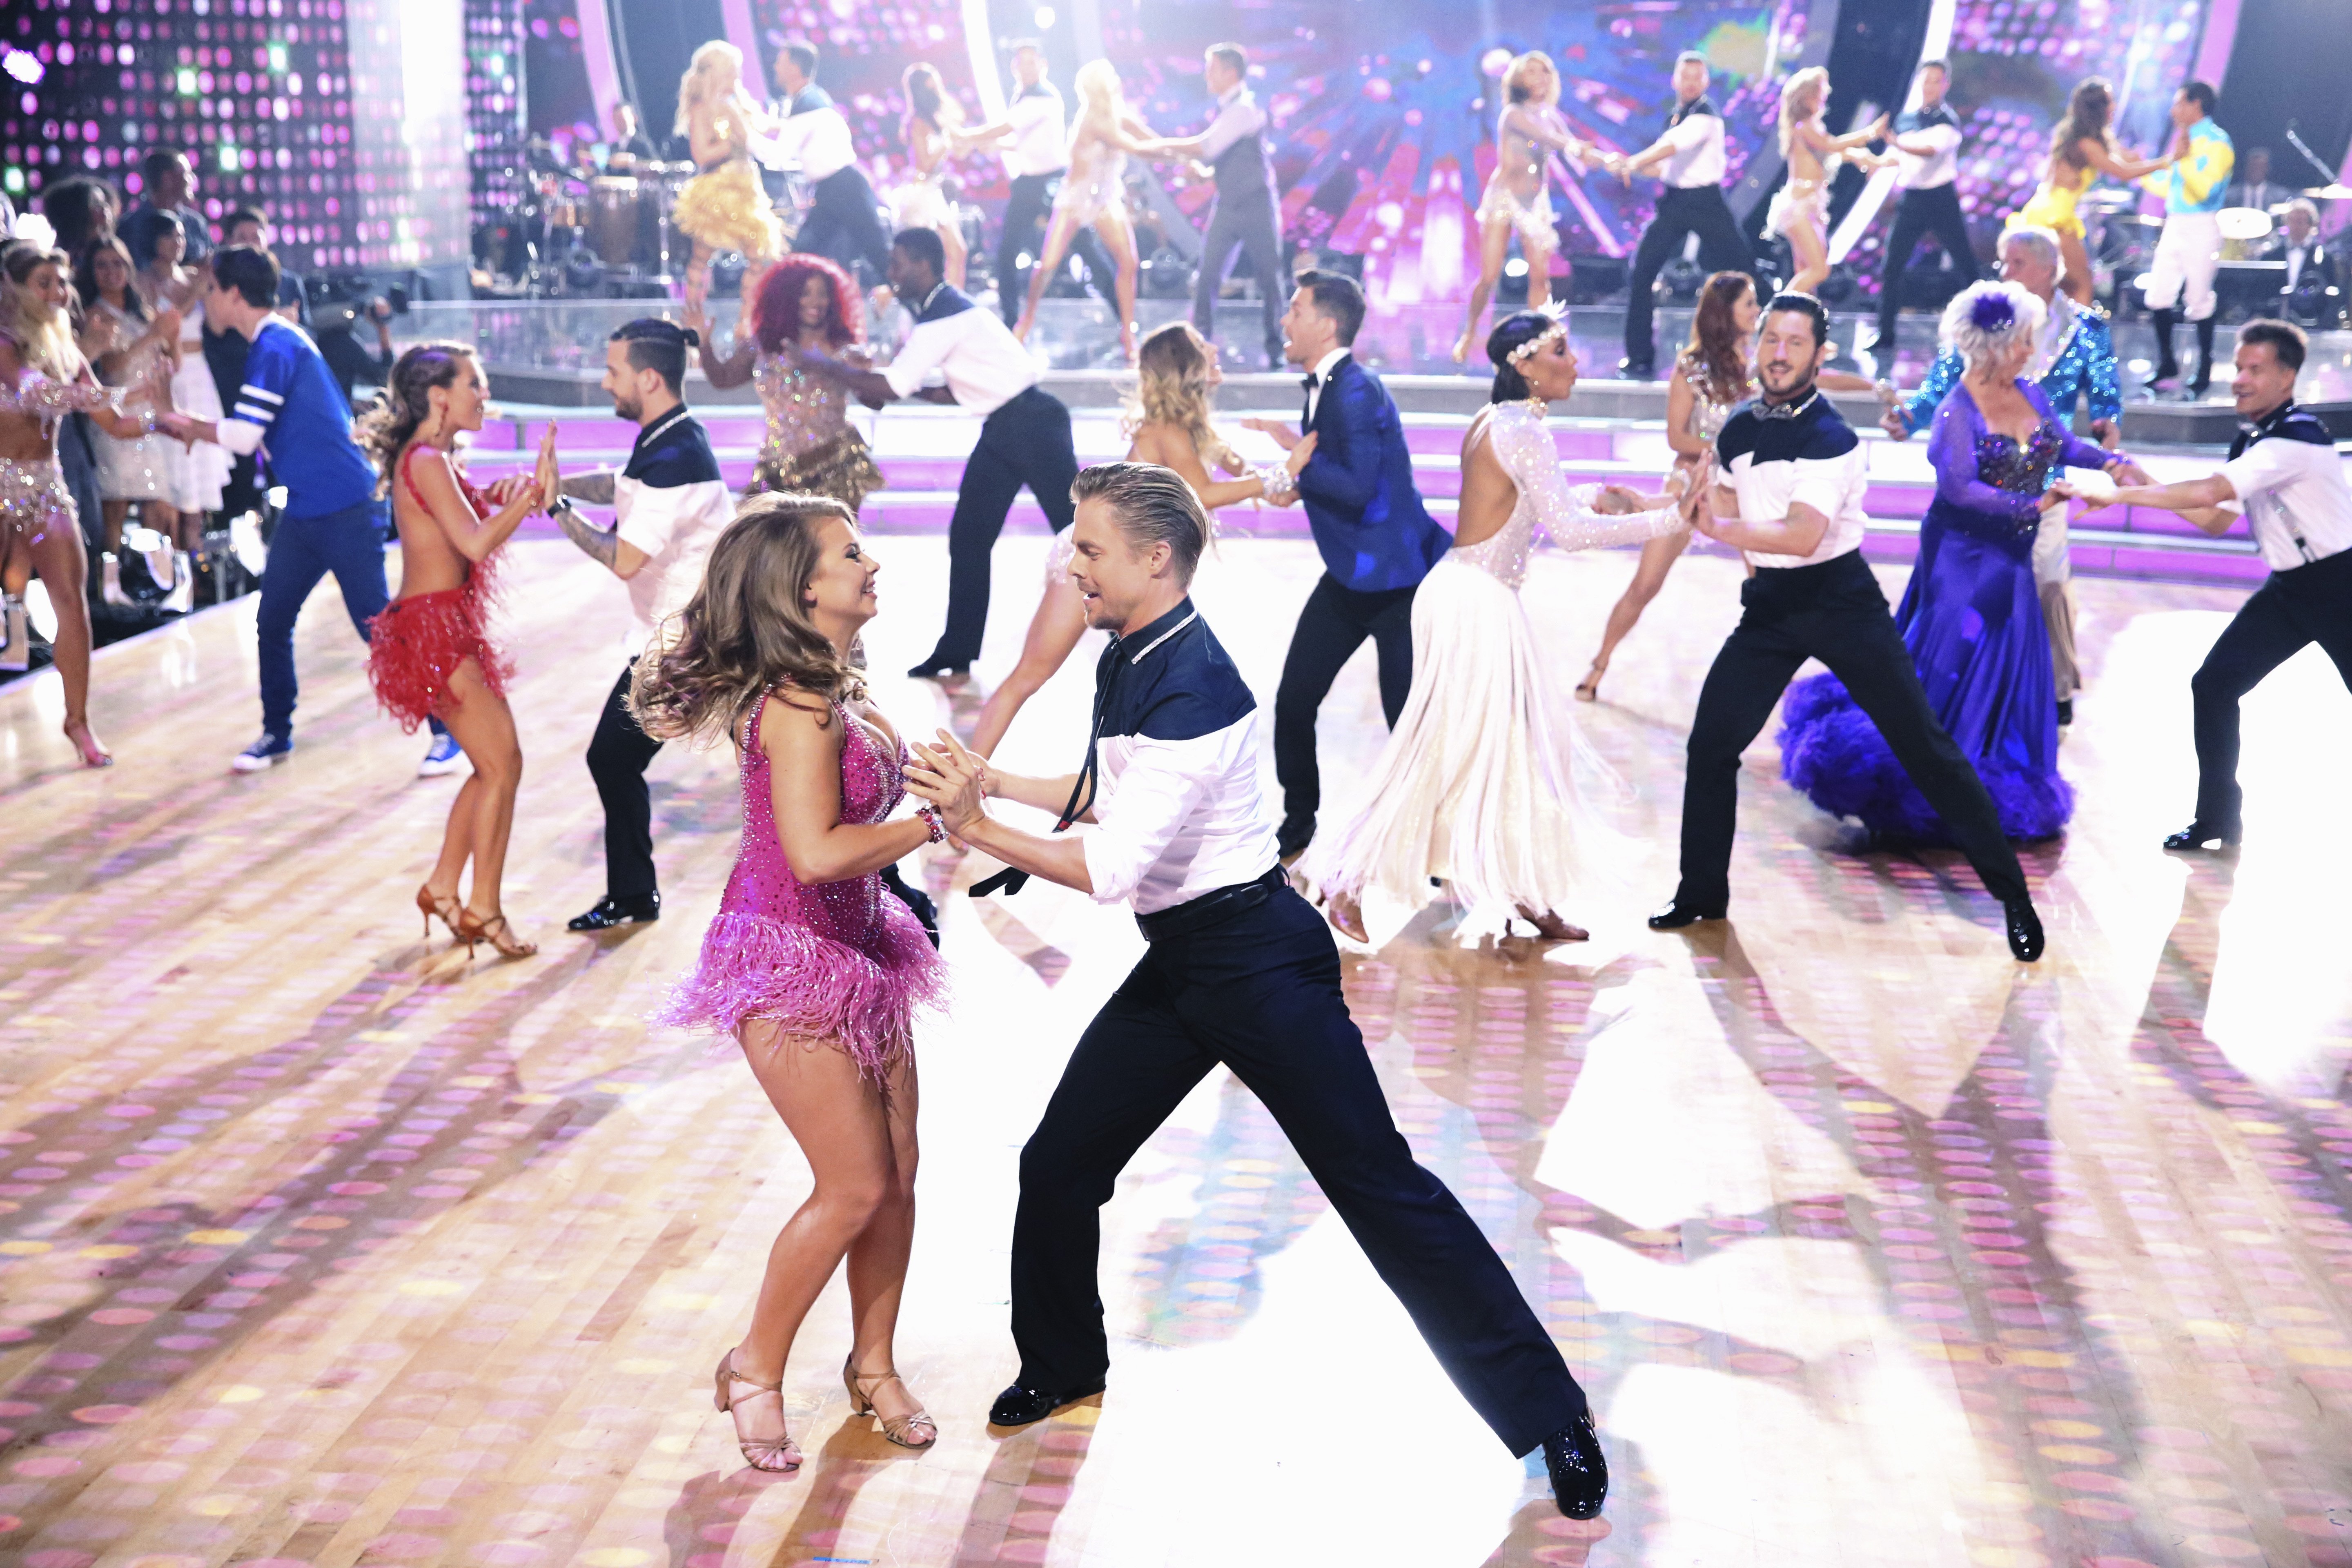 Bindi Irwin and singer Nick Carter, who danced the cha-cha with pro partner Sharna Burgess, tied for first place with 24 points each (out of a possible 30 points), on ABC's Dancing with the Starts Monday, September 14, 2015.